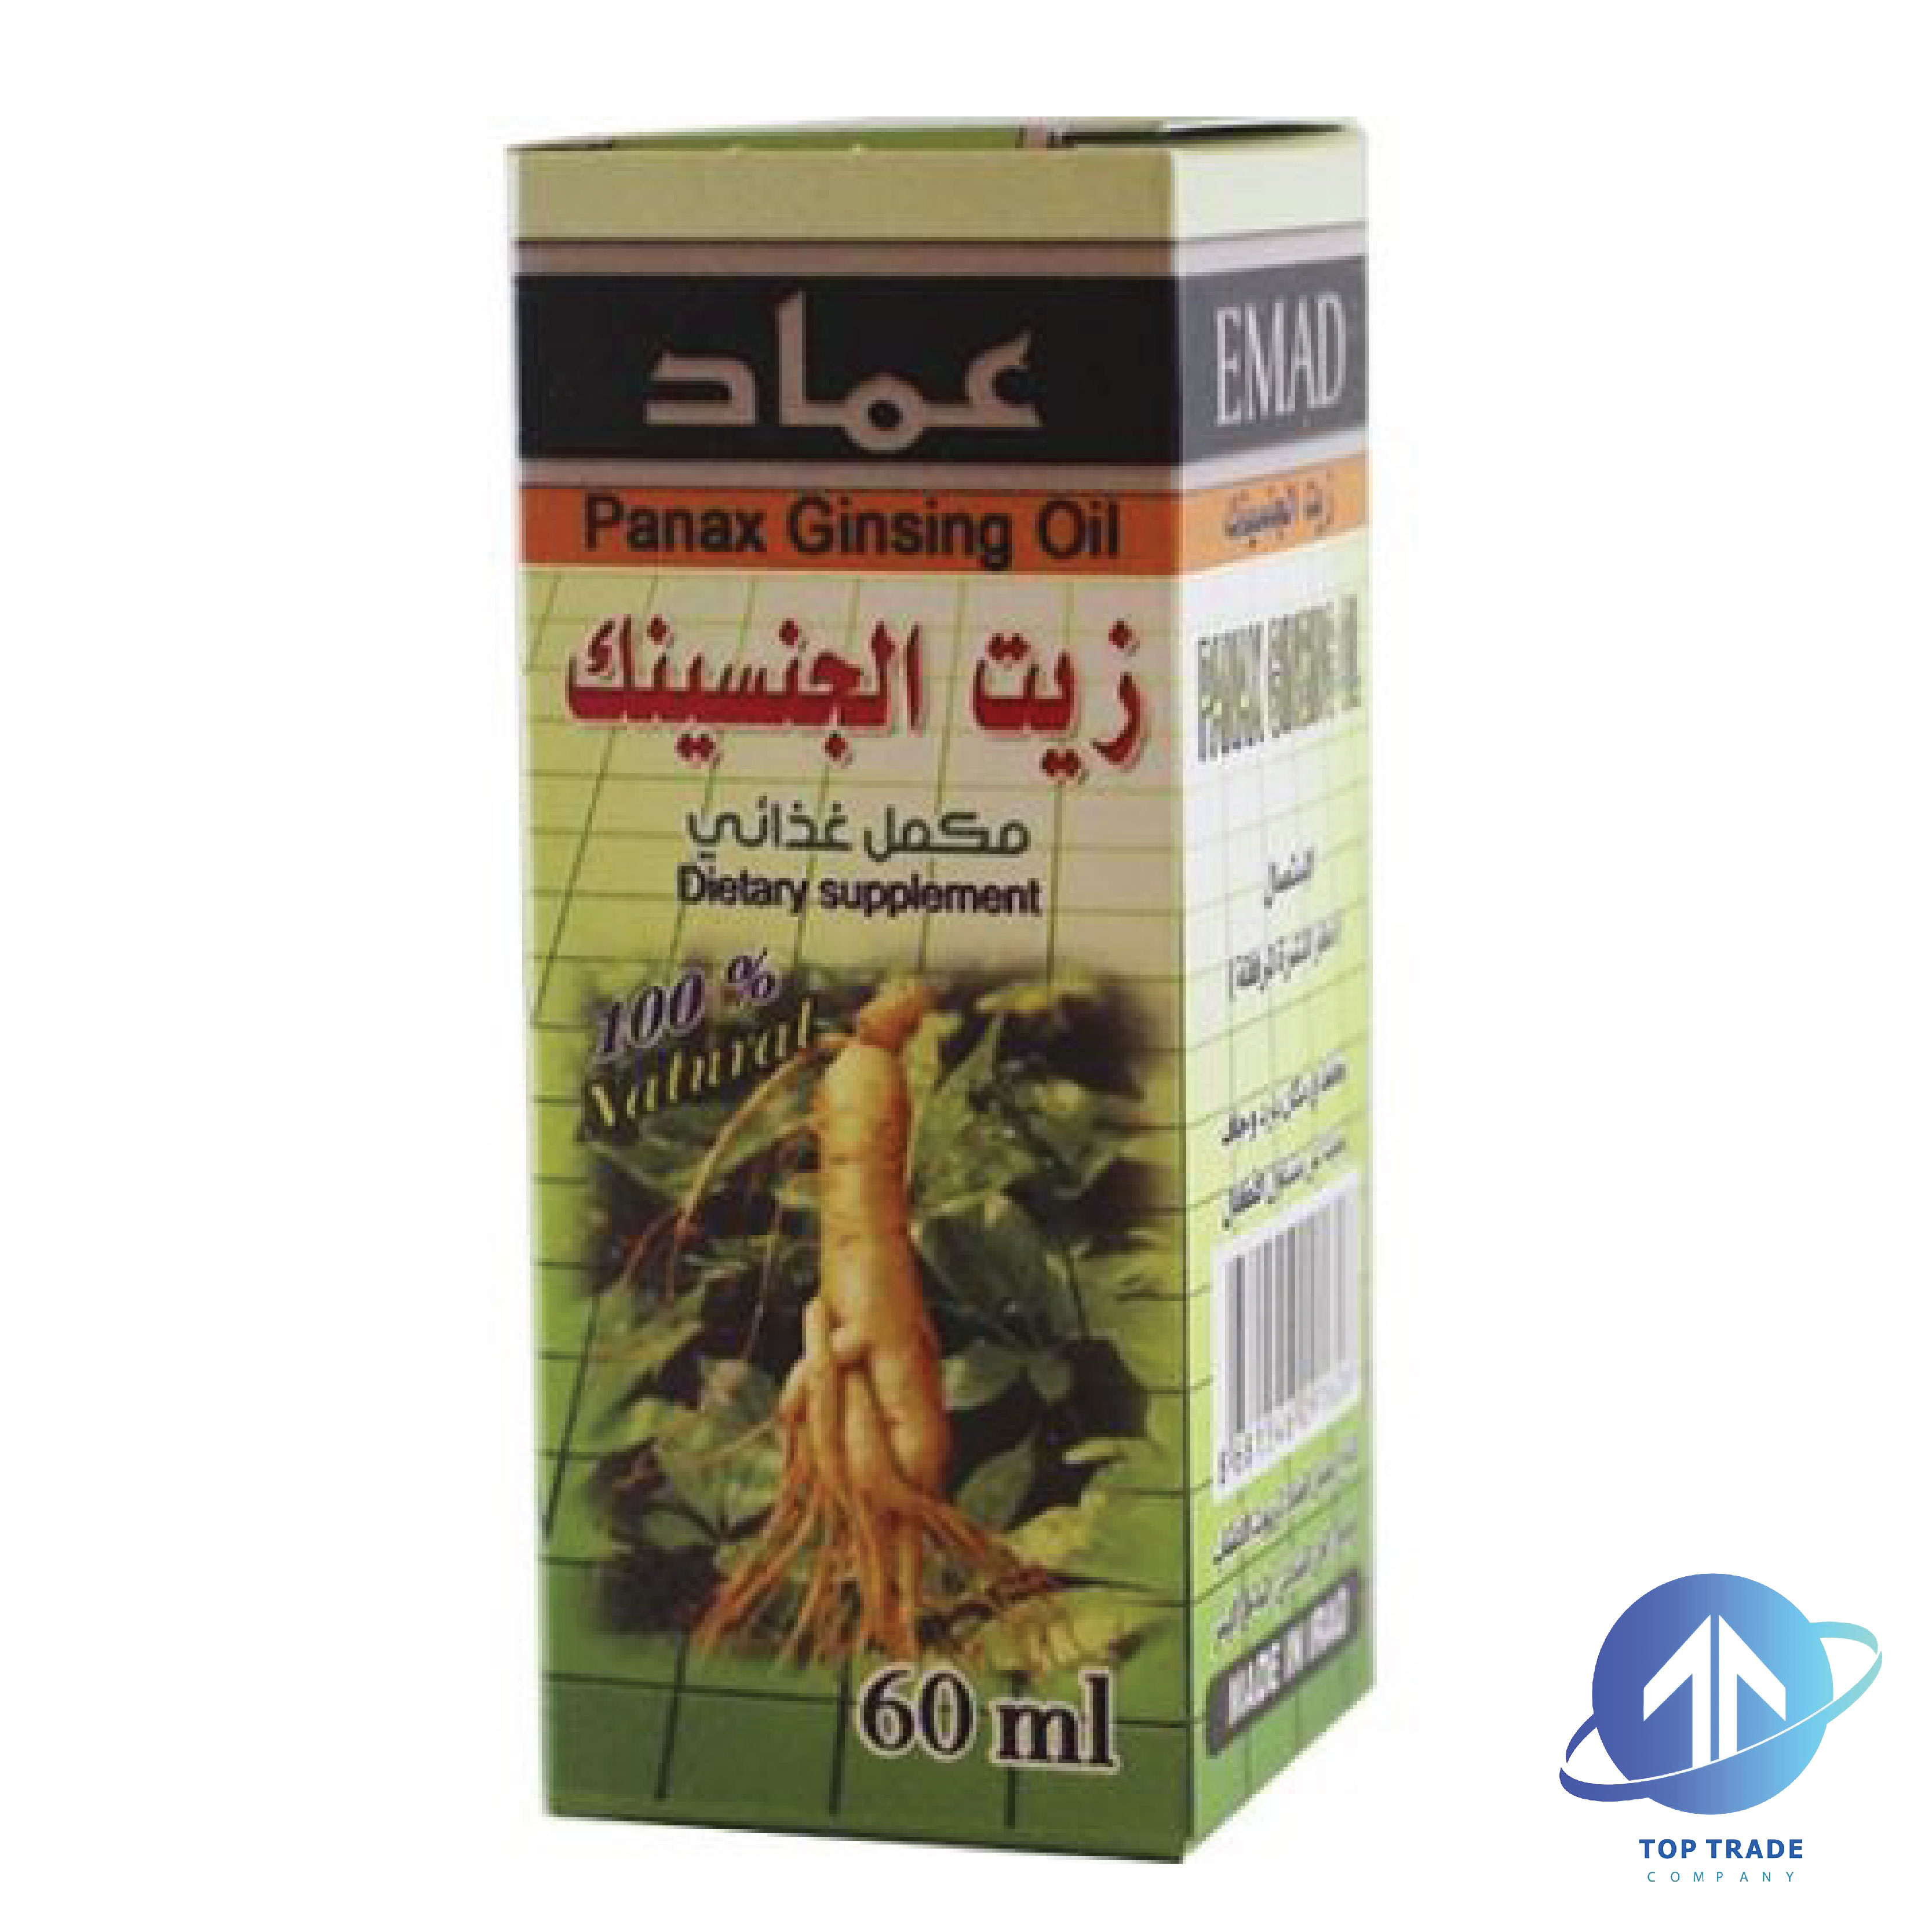 Emad Panax ginsing oil 60ML